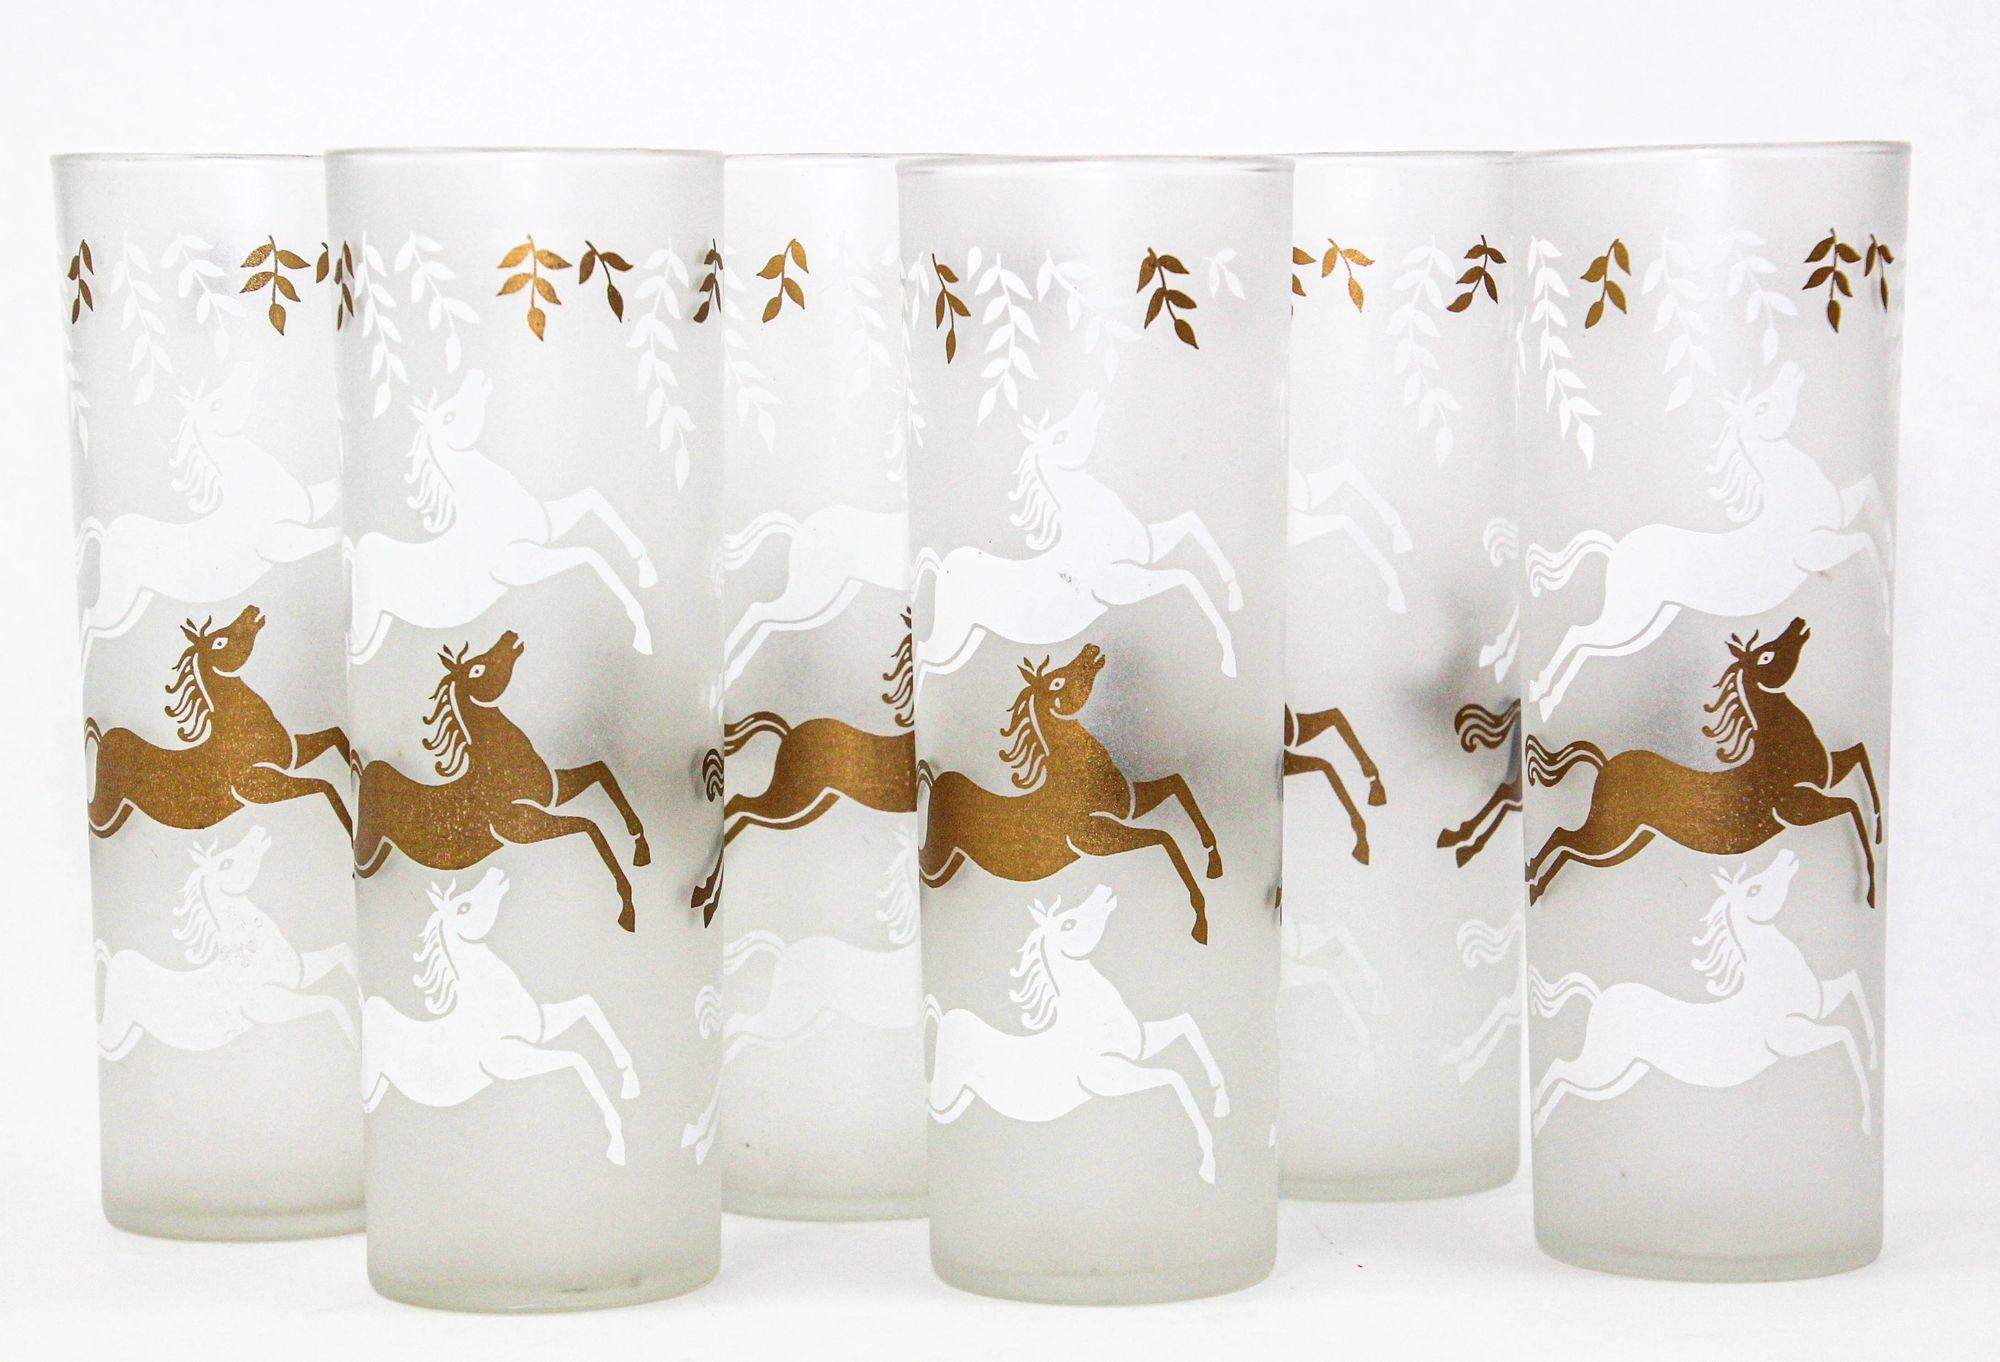 Vintage 1950s Cavalcade by Libbey Galloping Horses Tumbler Glasses Gold and frosted white, set of 6.
Set of Mid-Century Modern frosted horse highball tumblers glasses frosted white and gold toned cavalcade of stallions.
Fabulous and fun set to enjoy